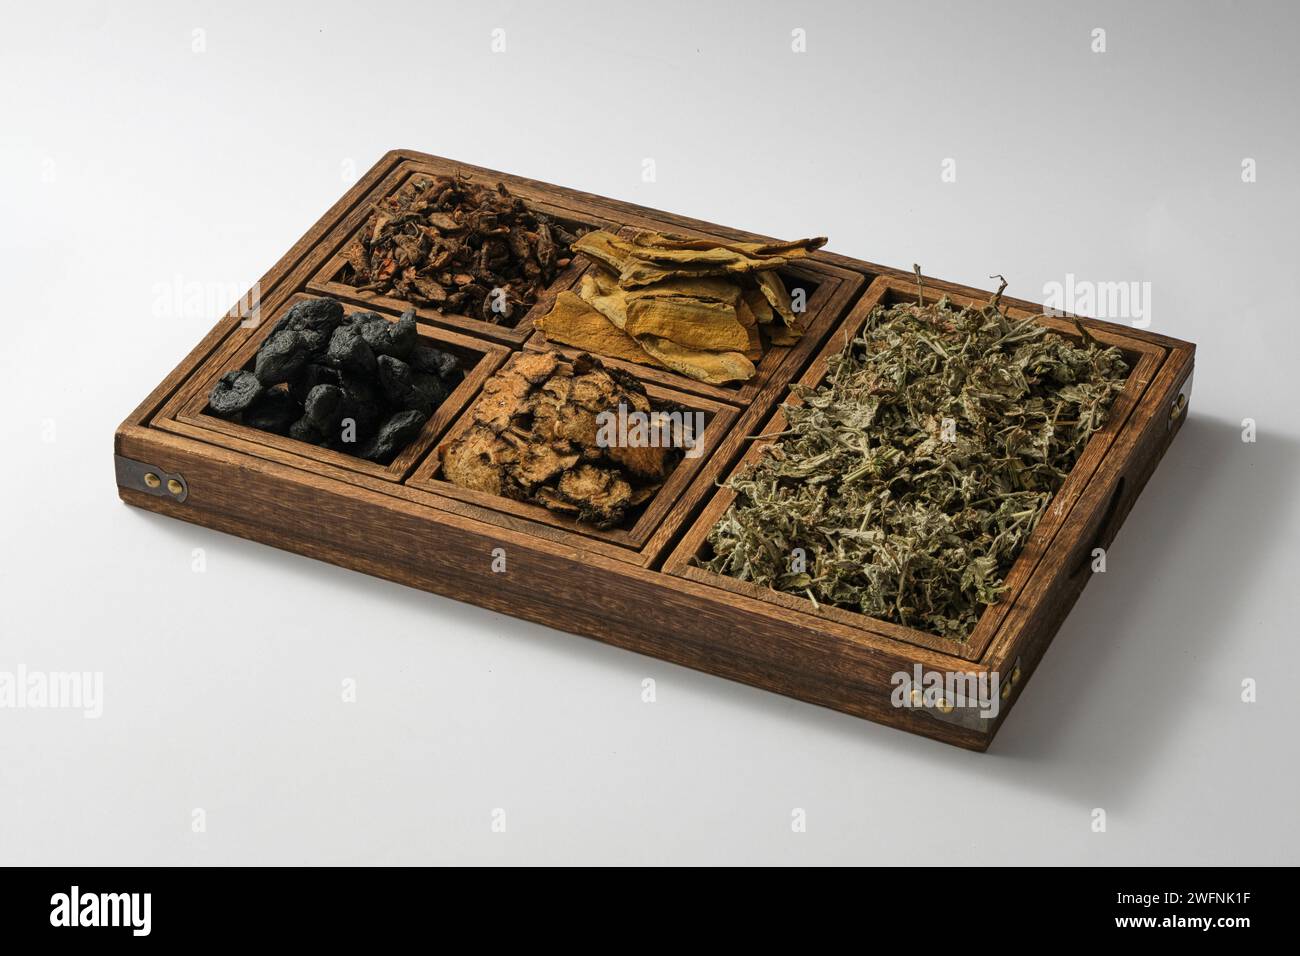 A wooden tray with compartments containing some types of herb. These herbs have great medicinal value and very precious as traditional medicine Stock Photo